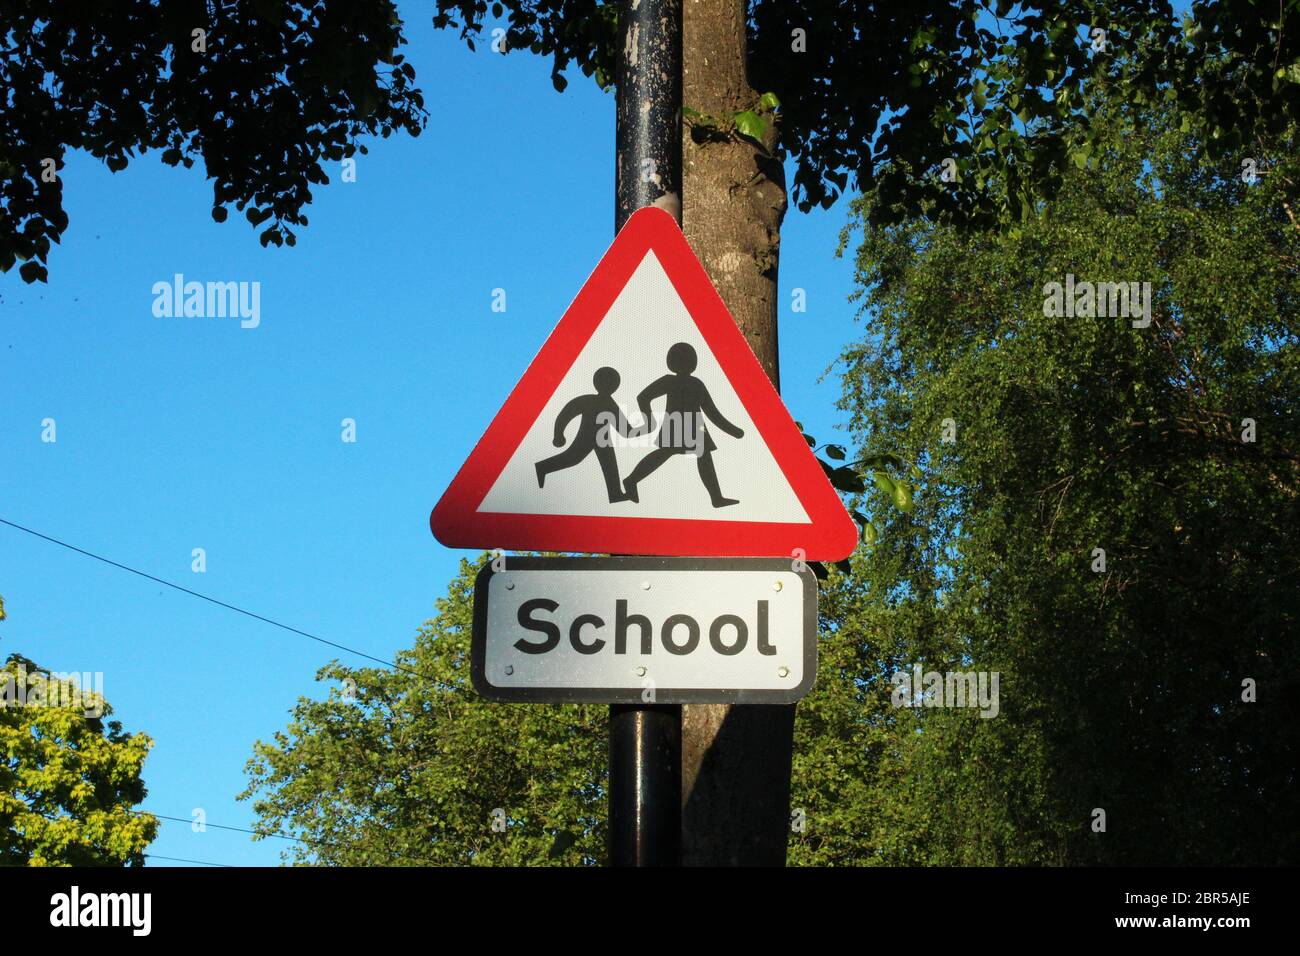 Red triangle 'School' sign on a clear day in Manchester, England Stock Photo